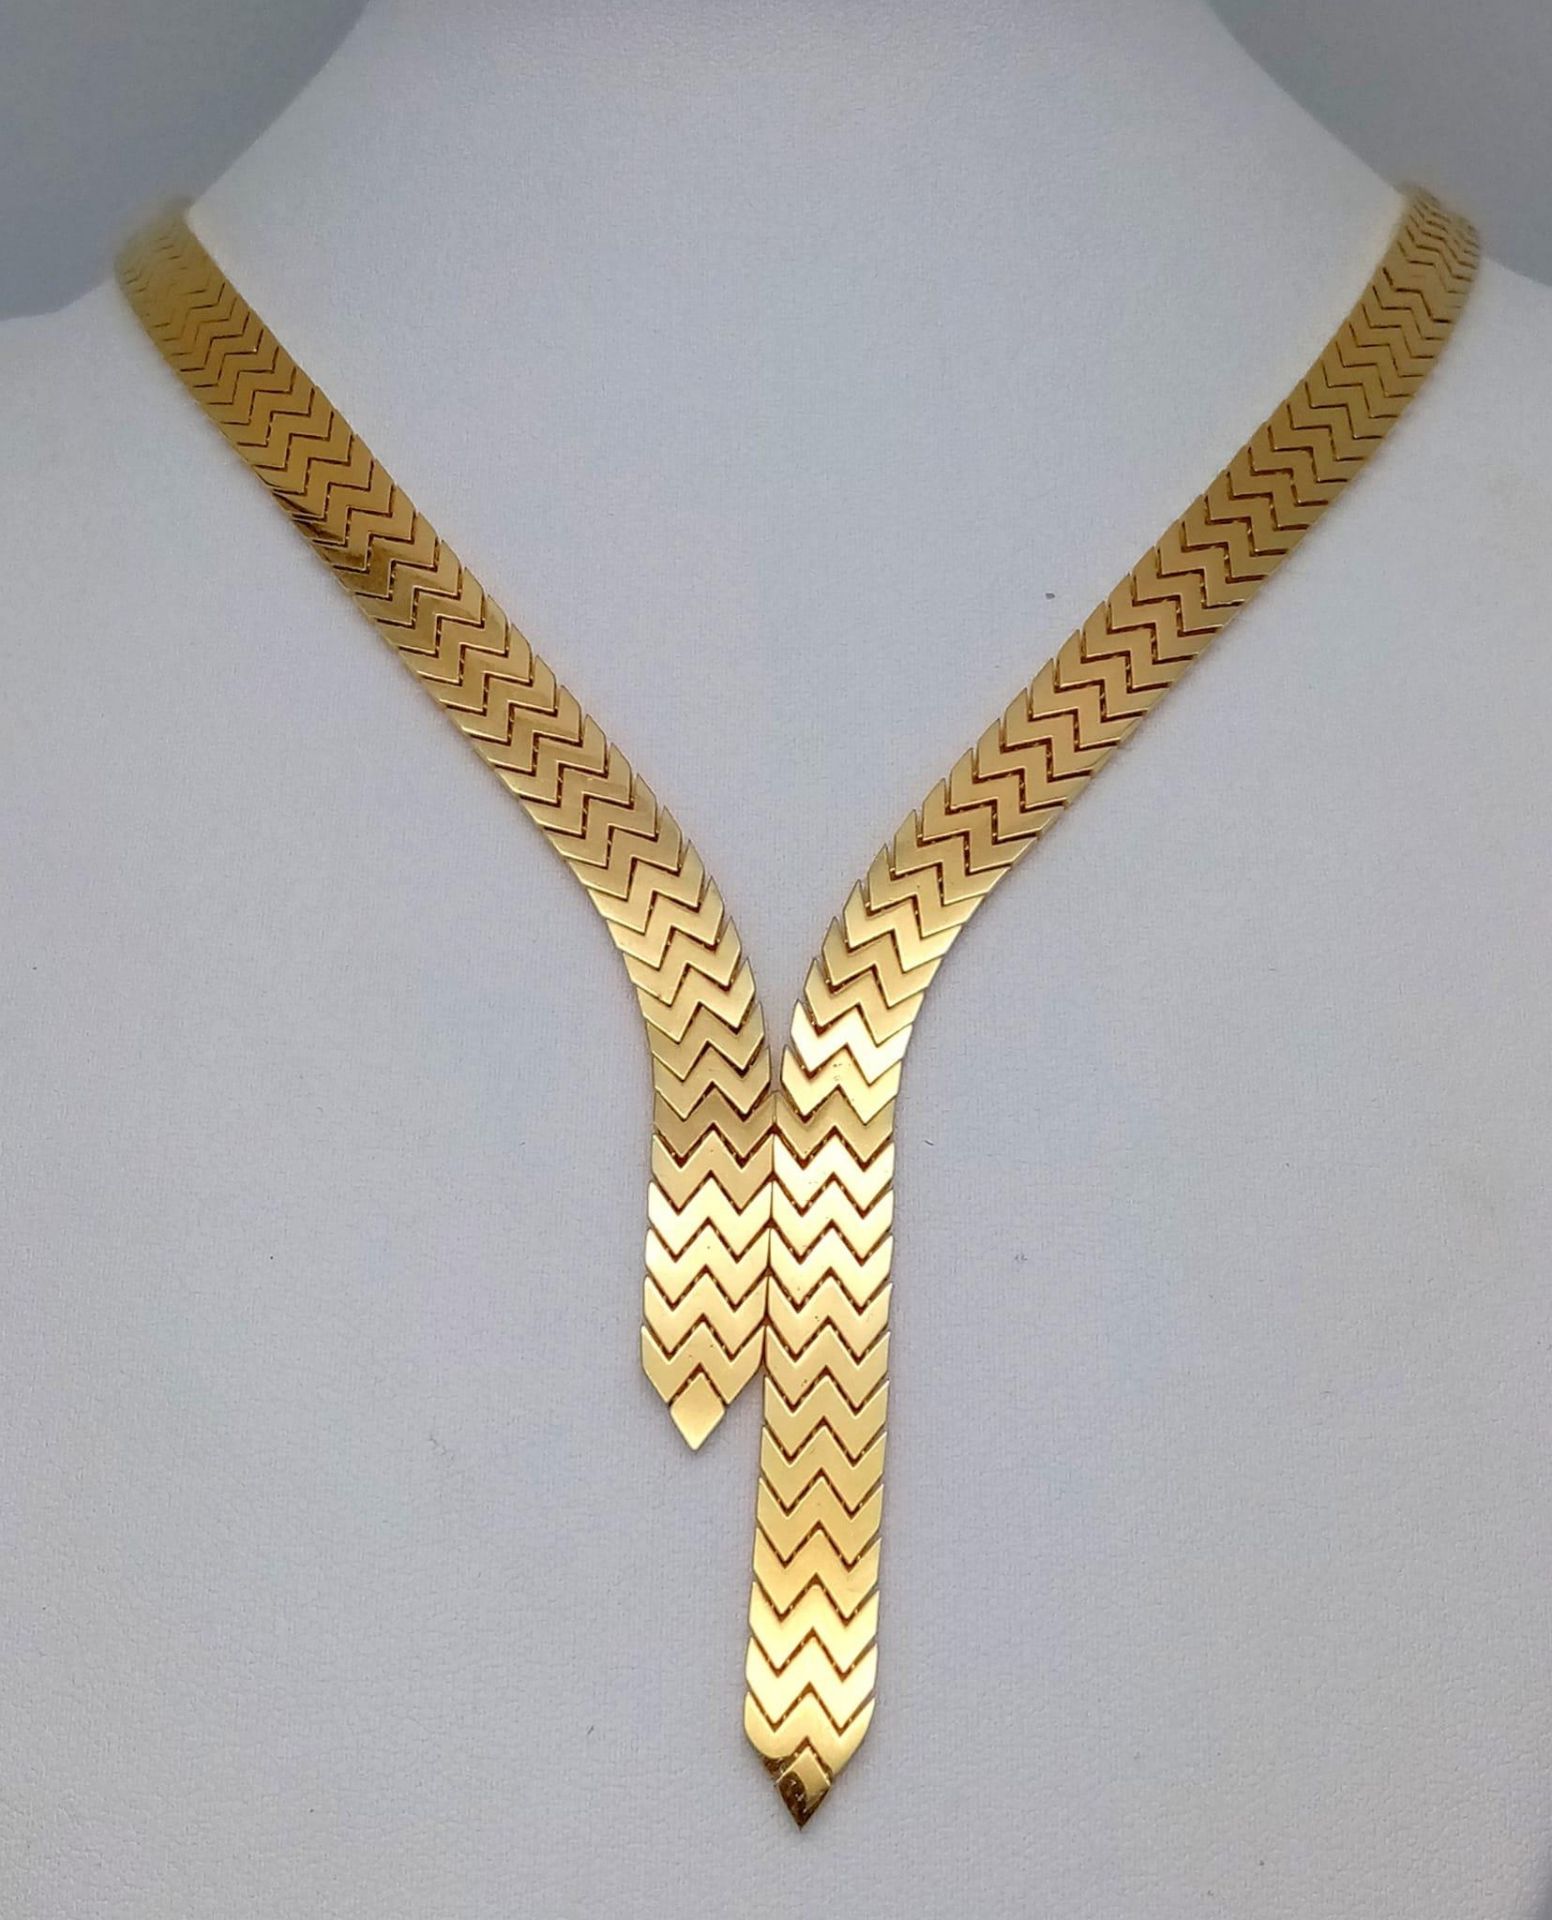 An Elegant 18K Gold Flat Scale Link Necklace with Twin Tassel Extenders. 48cm length. 35.25g weight.